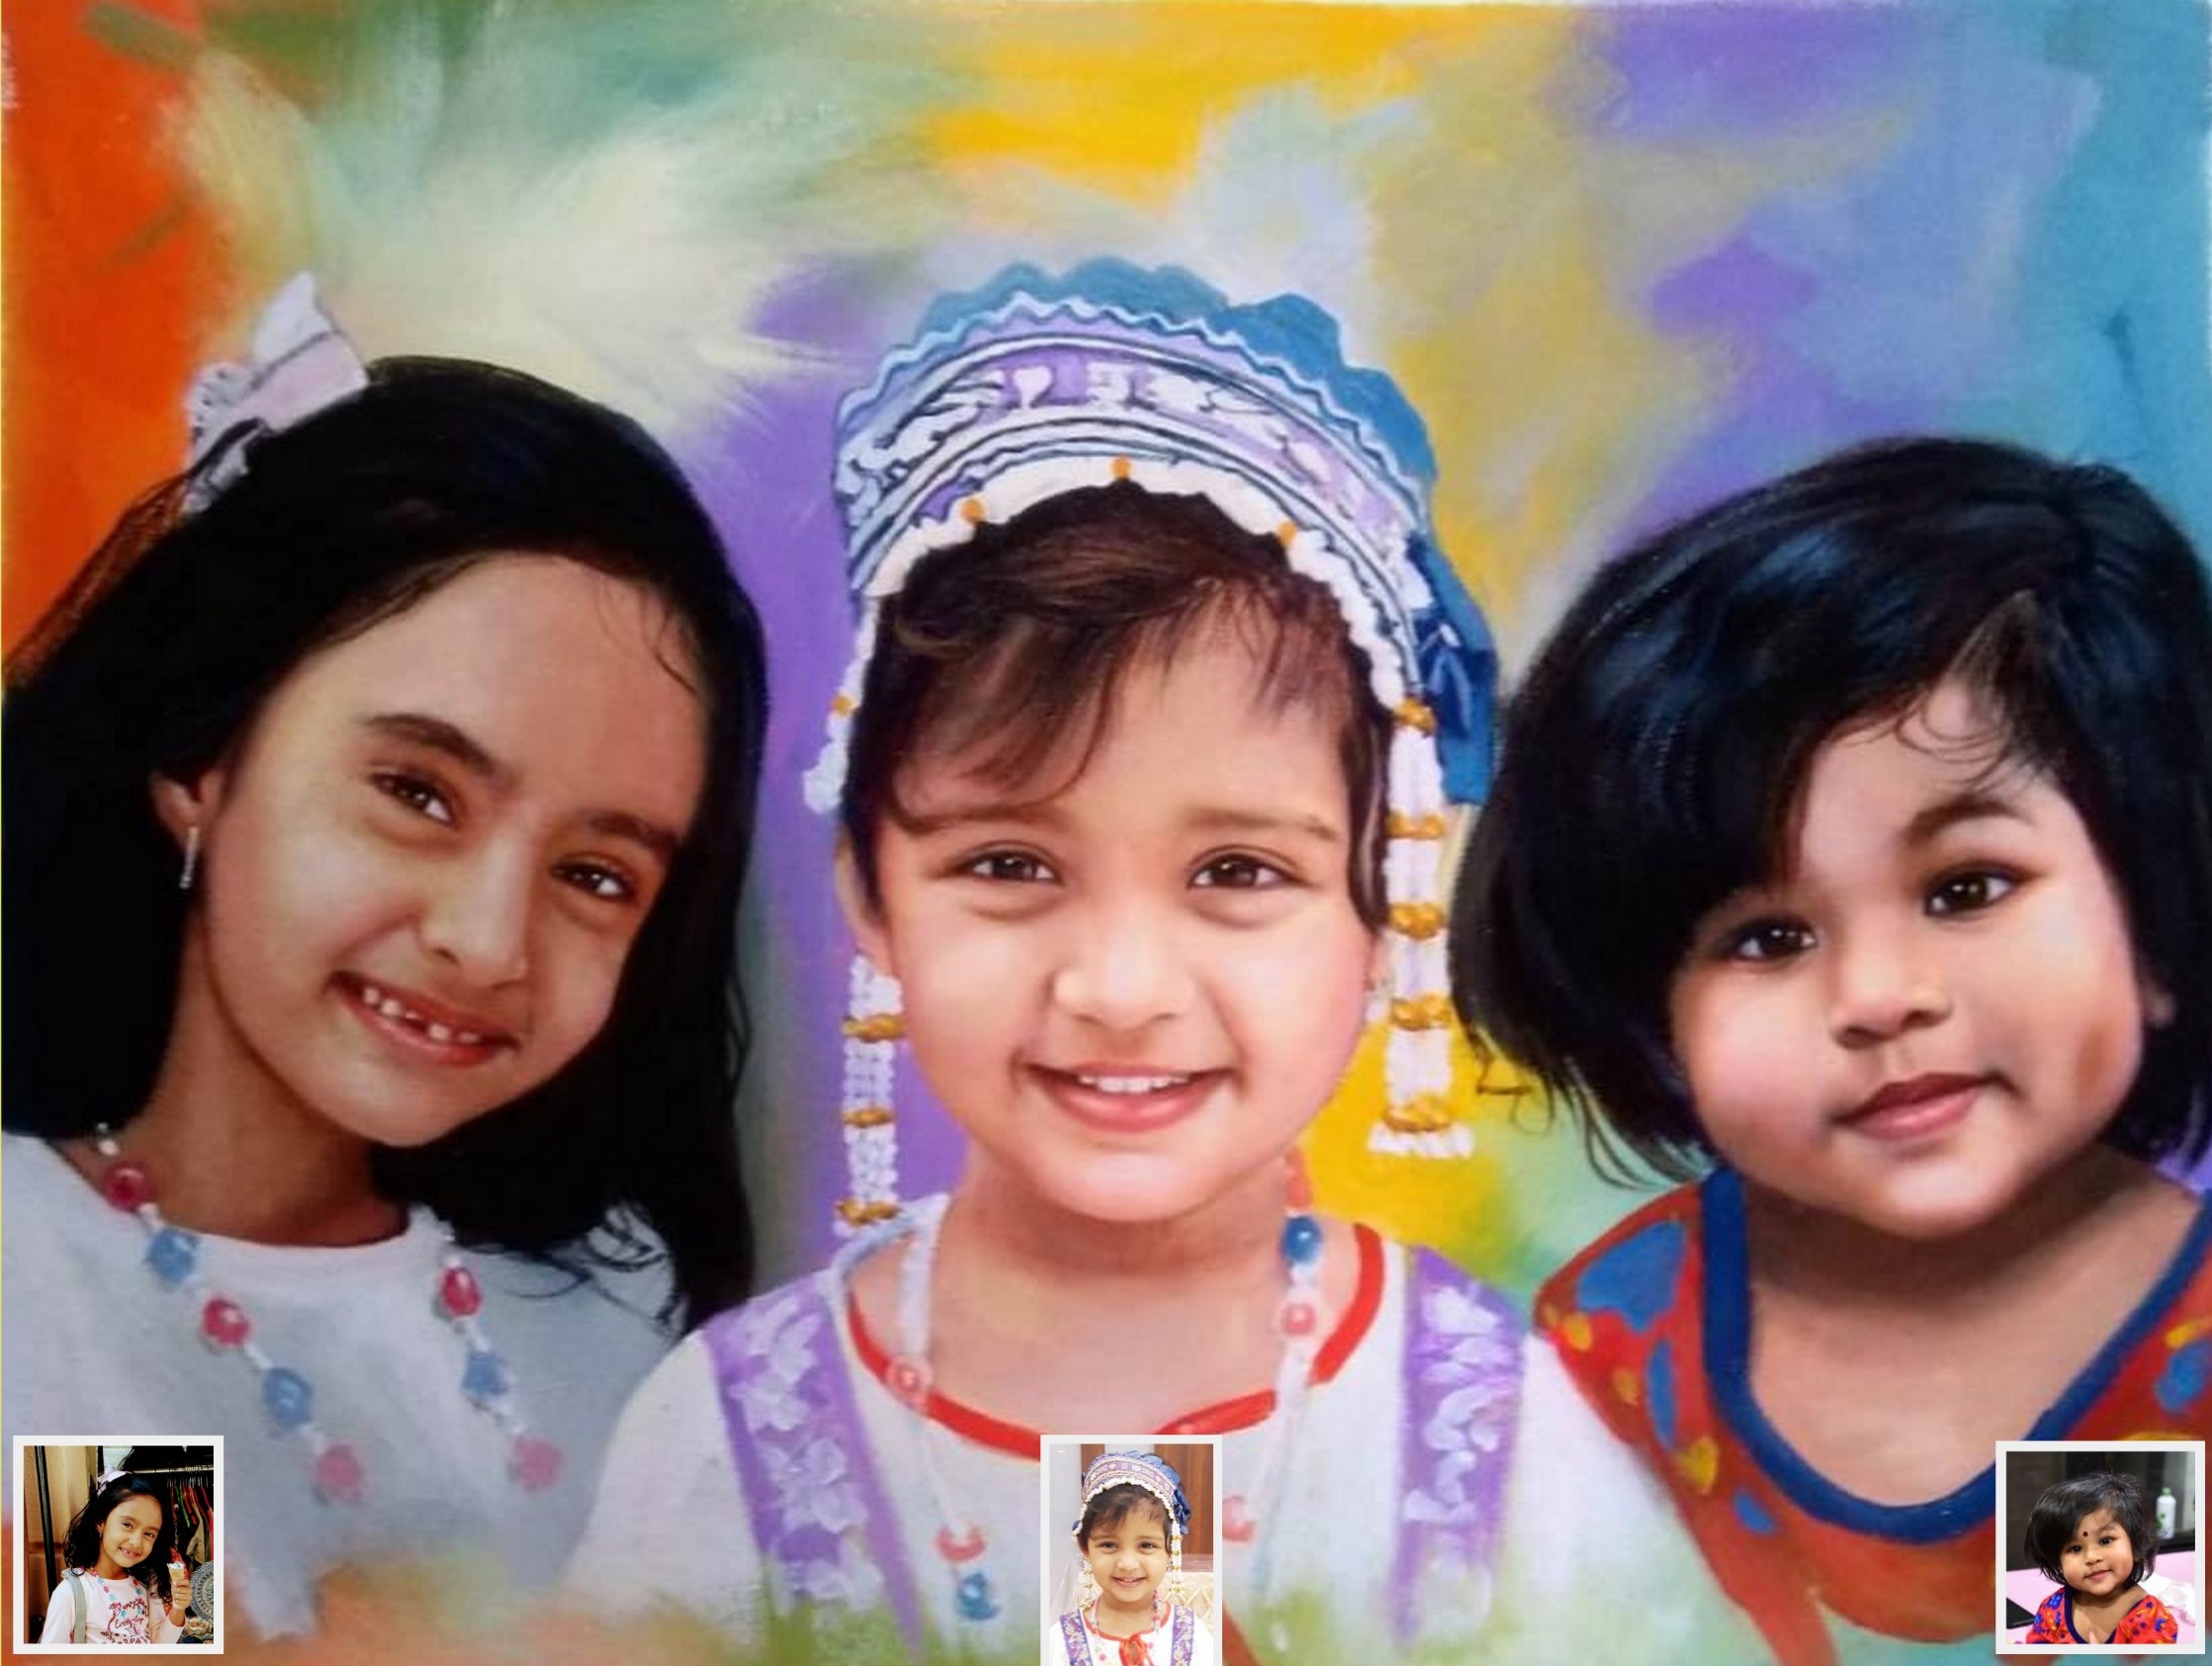 three little sisters oil painting canvas from photo, canvas painting artist near me, photo painting